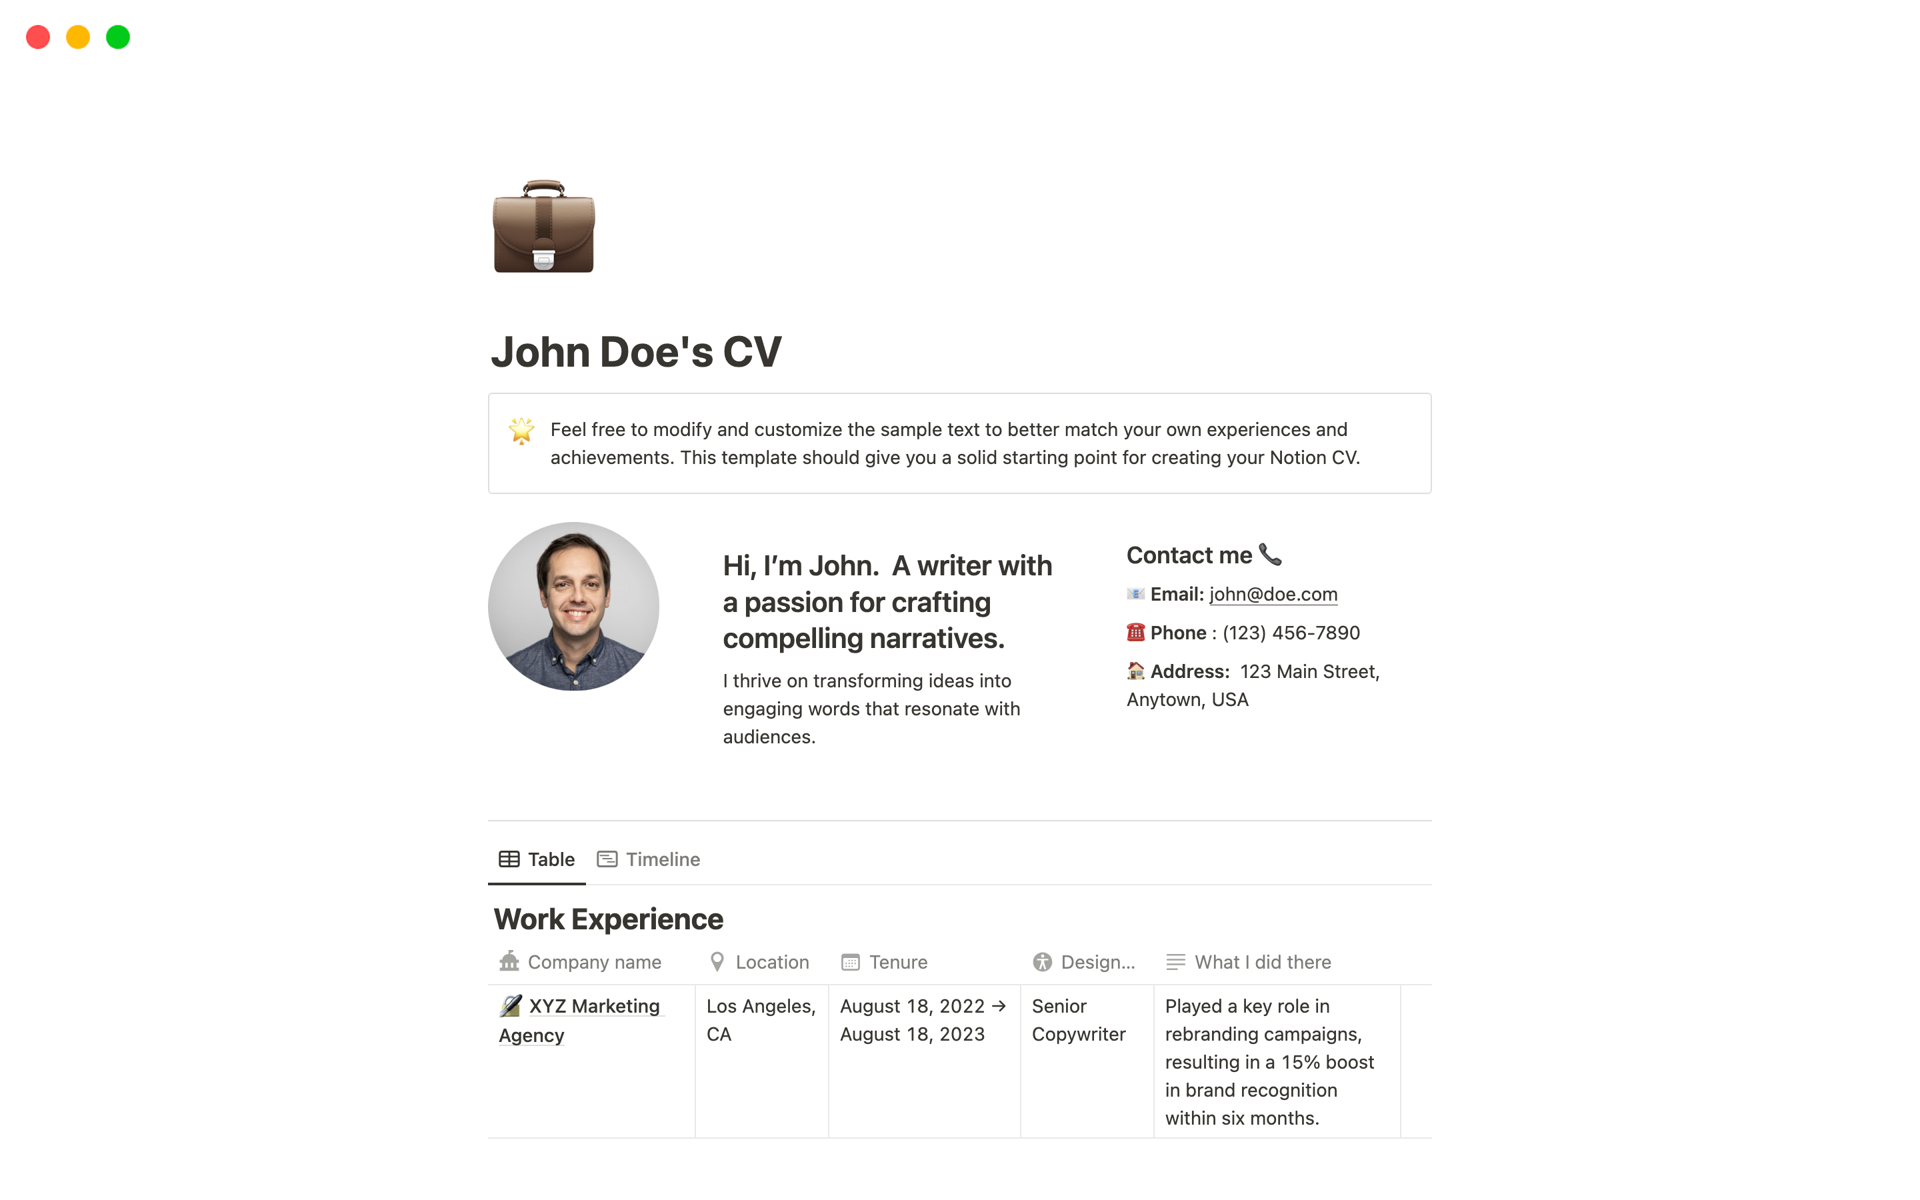 JohnDoe Regular : Download For Free, View Sample Text, Rating And More On